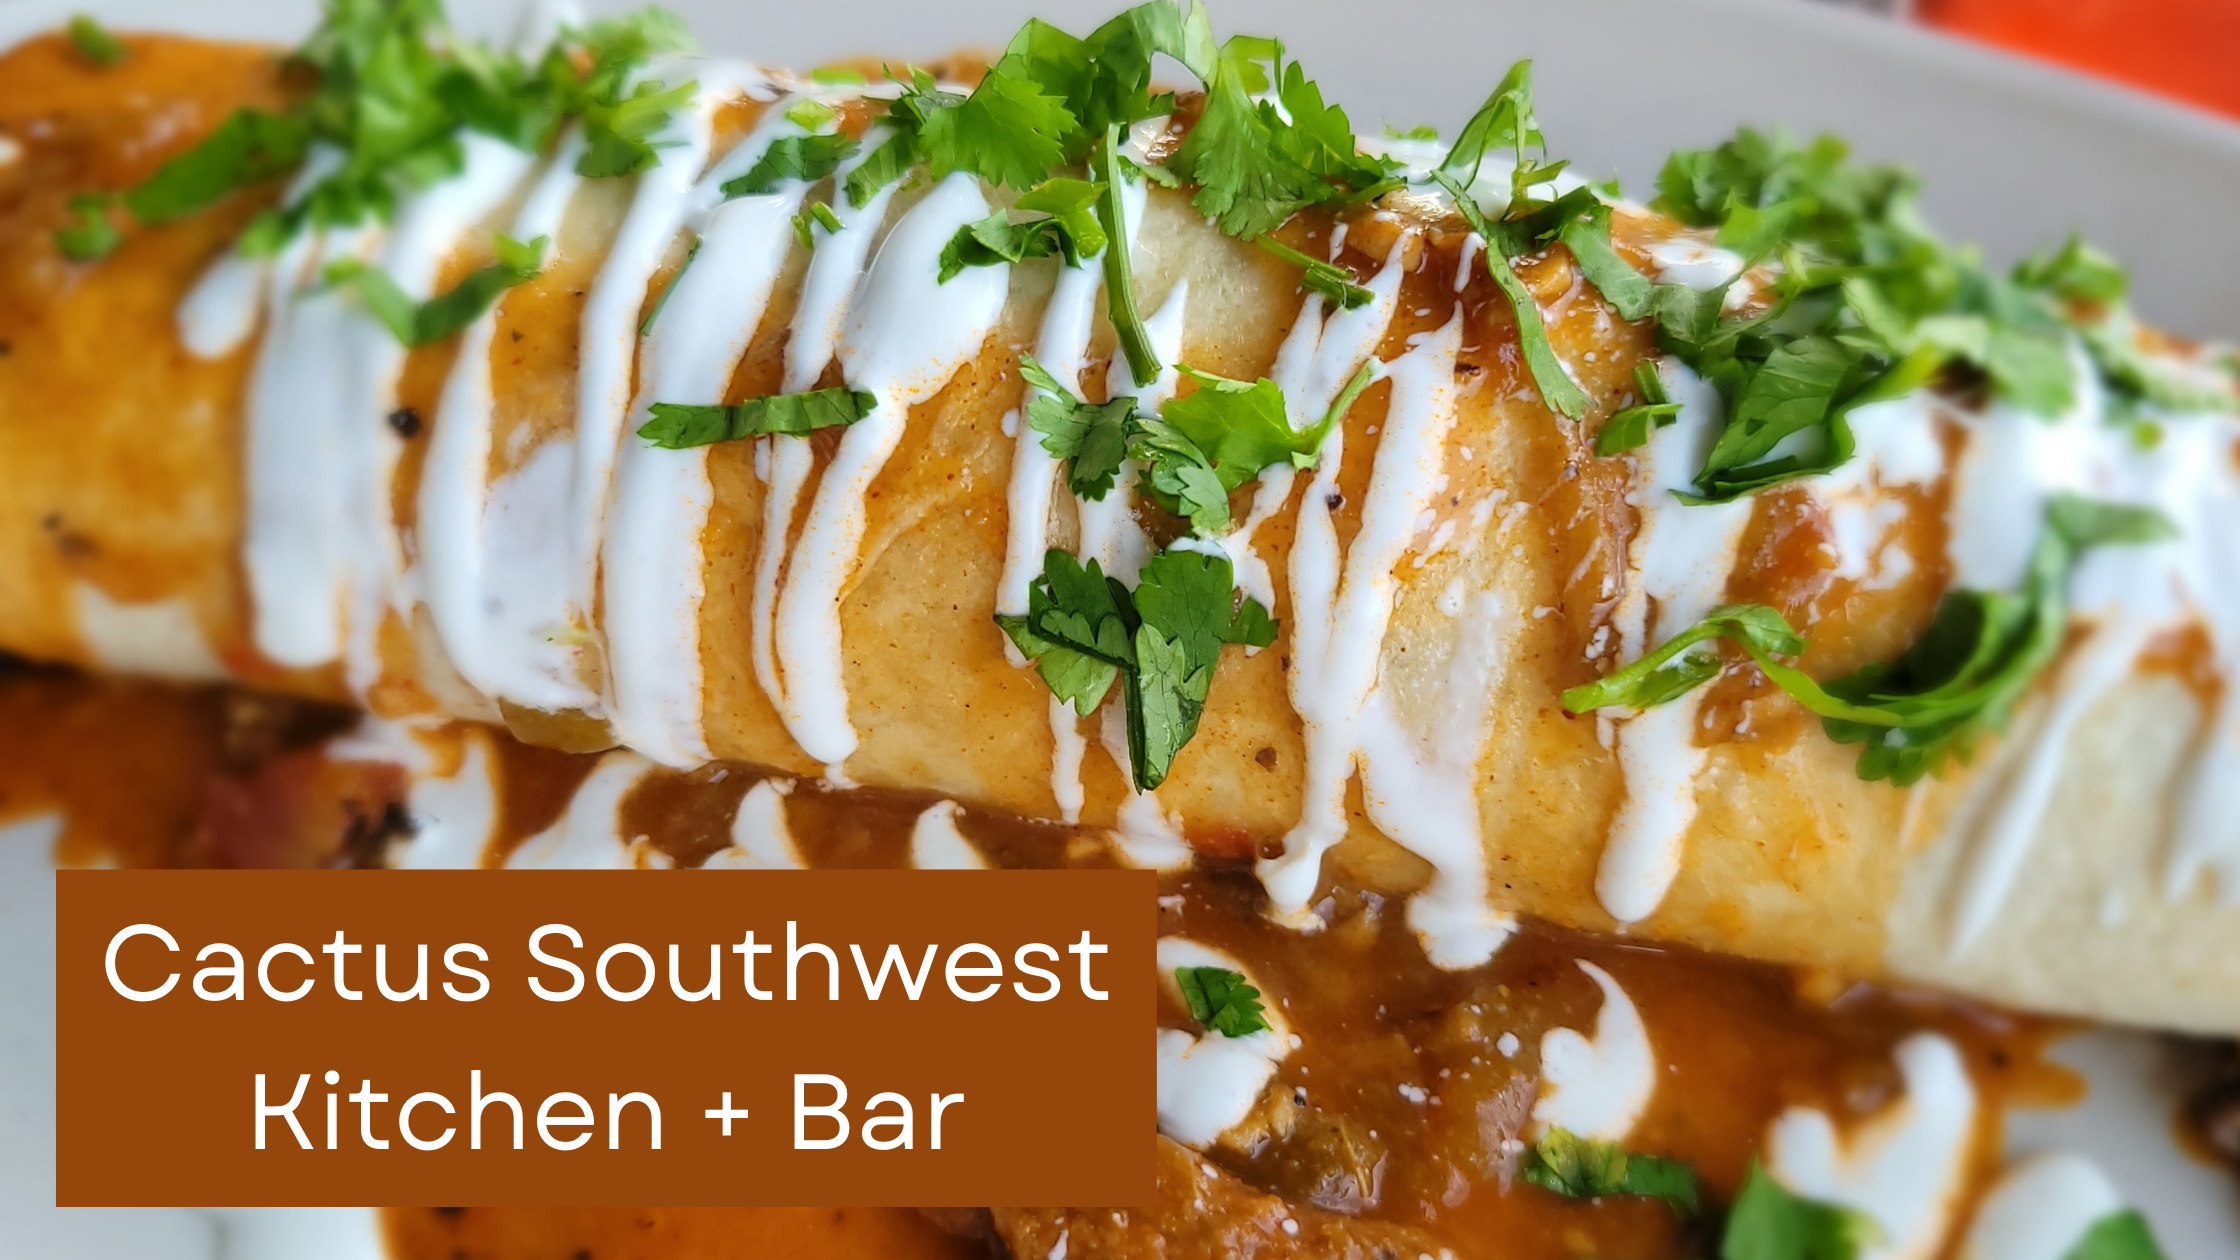 Saucy burrito with a text box that reads "Cactus Southwest Kitchen + Bar"